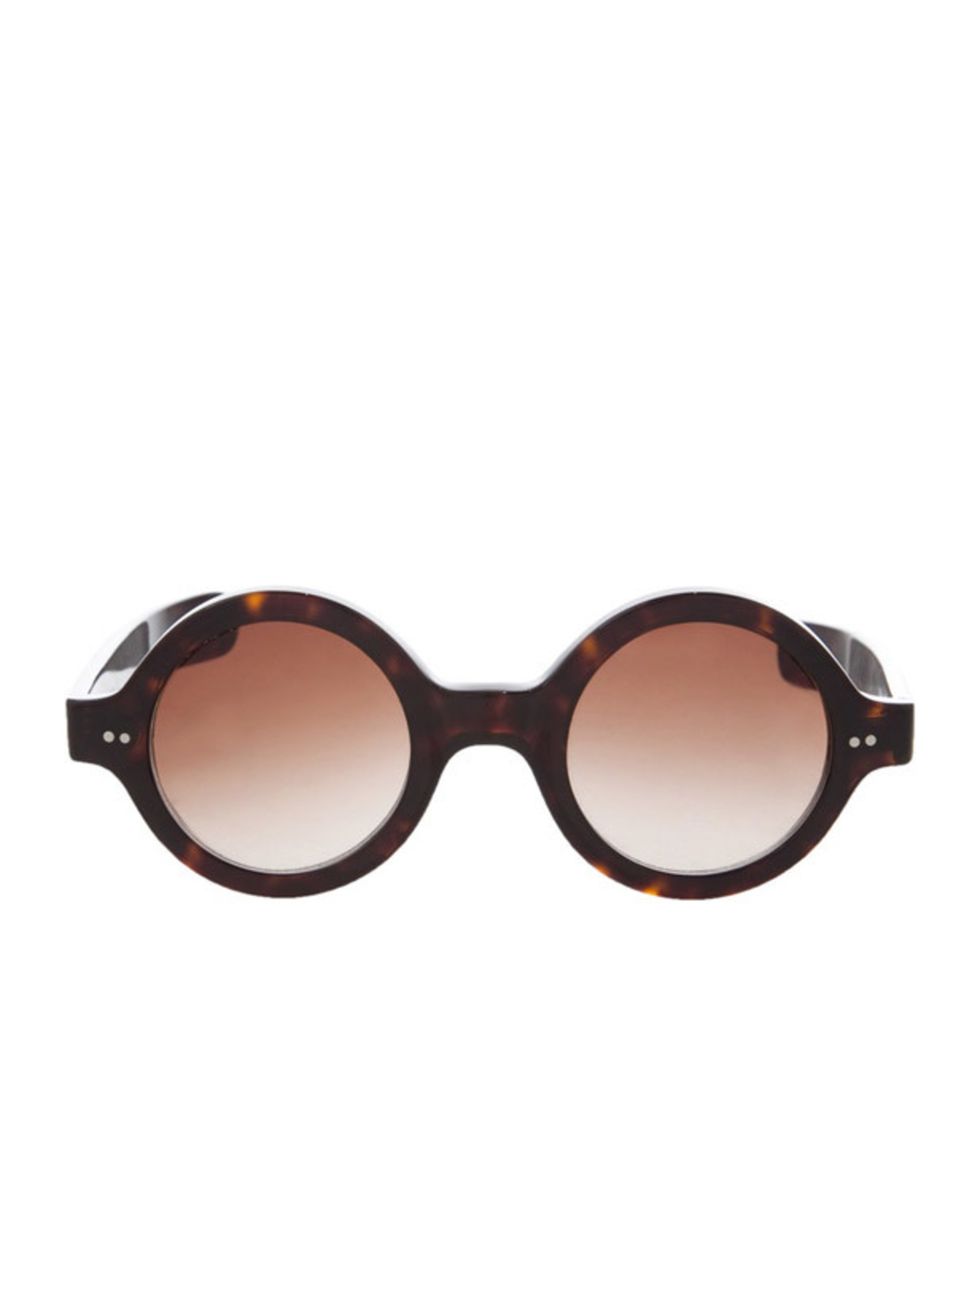 <p> </p><p> </p><p>In the heart of Shoreditch, No-One boutique is a must for anyone who wants to find young and independent designers. These retro tortoiseshell sunglasses by Black are one of our many favourite pieces... Black Eyewear round frame sunglass